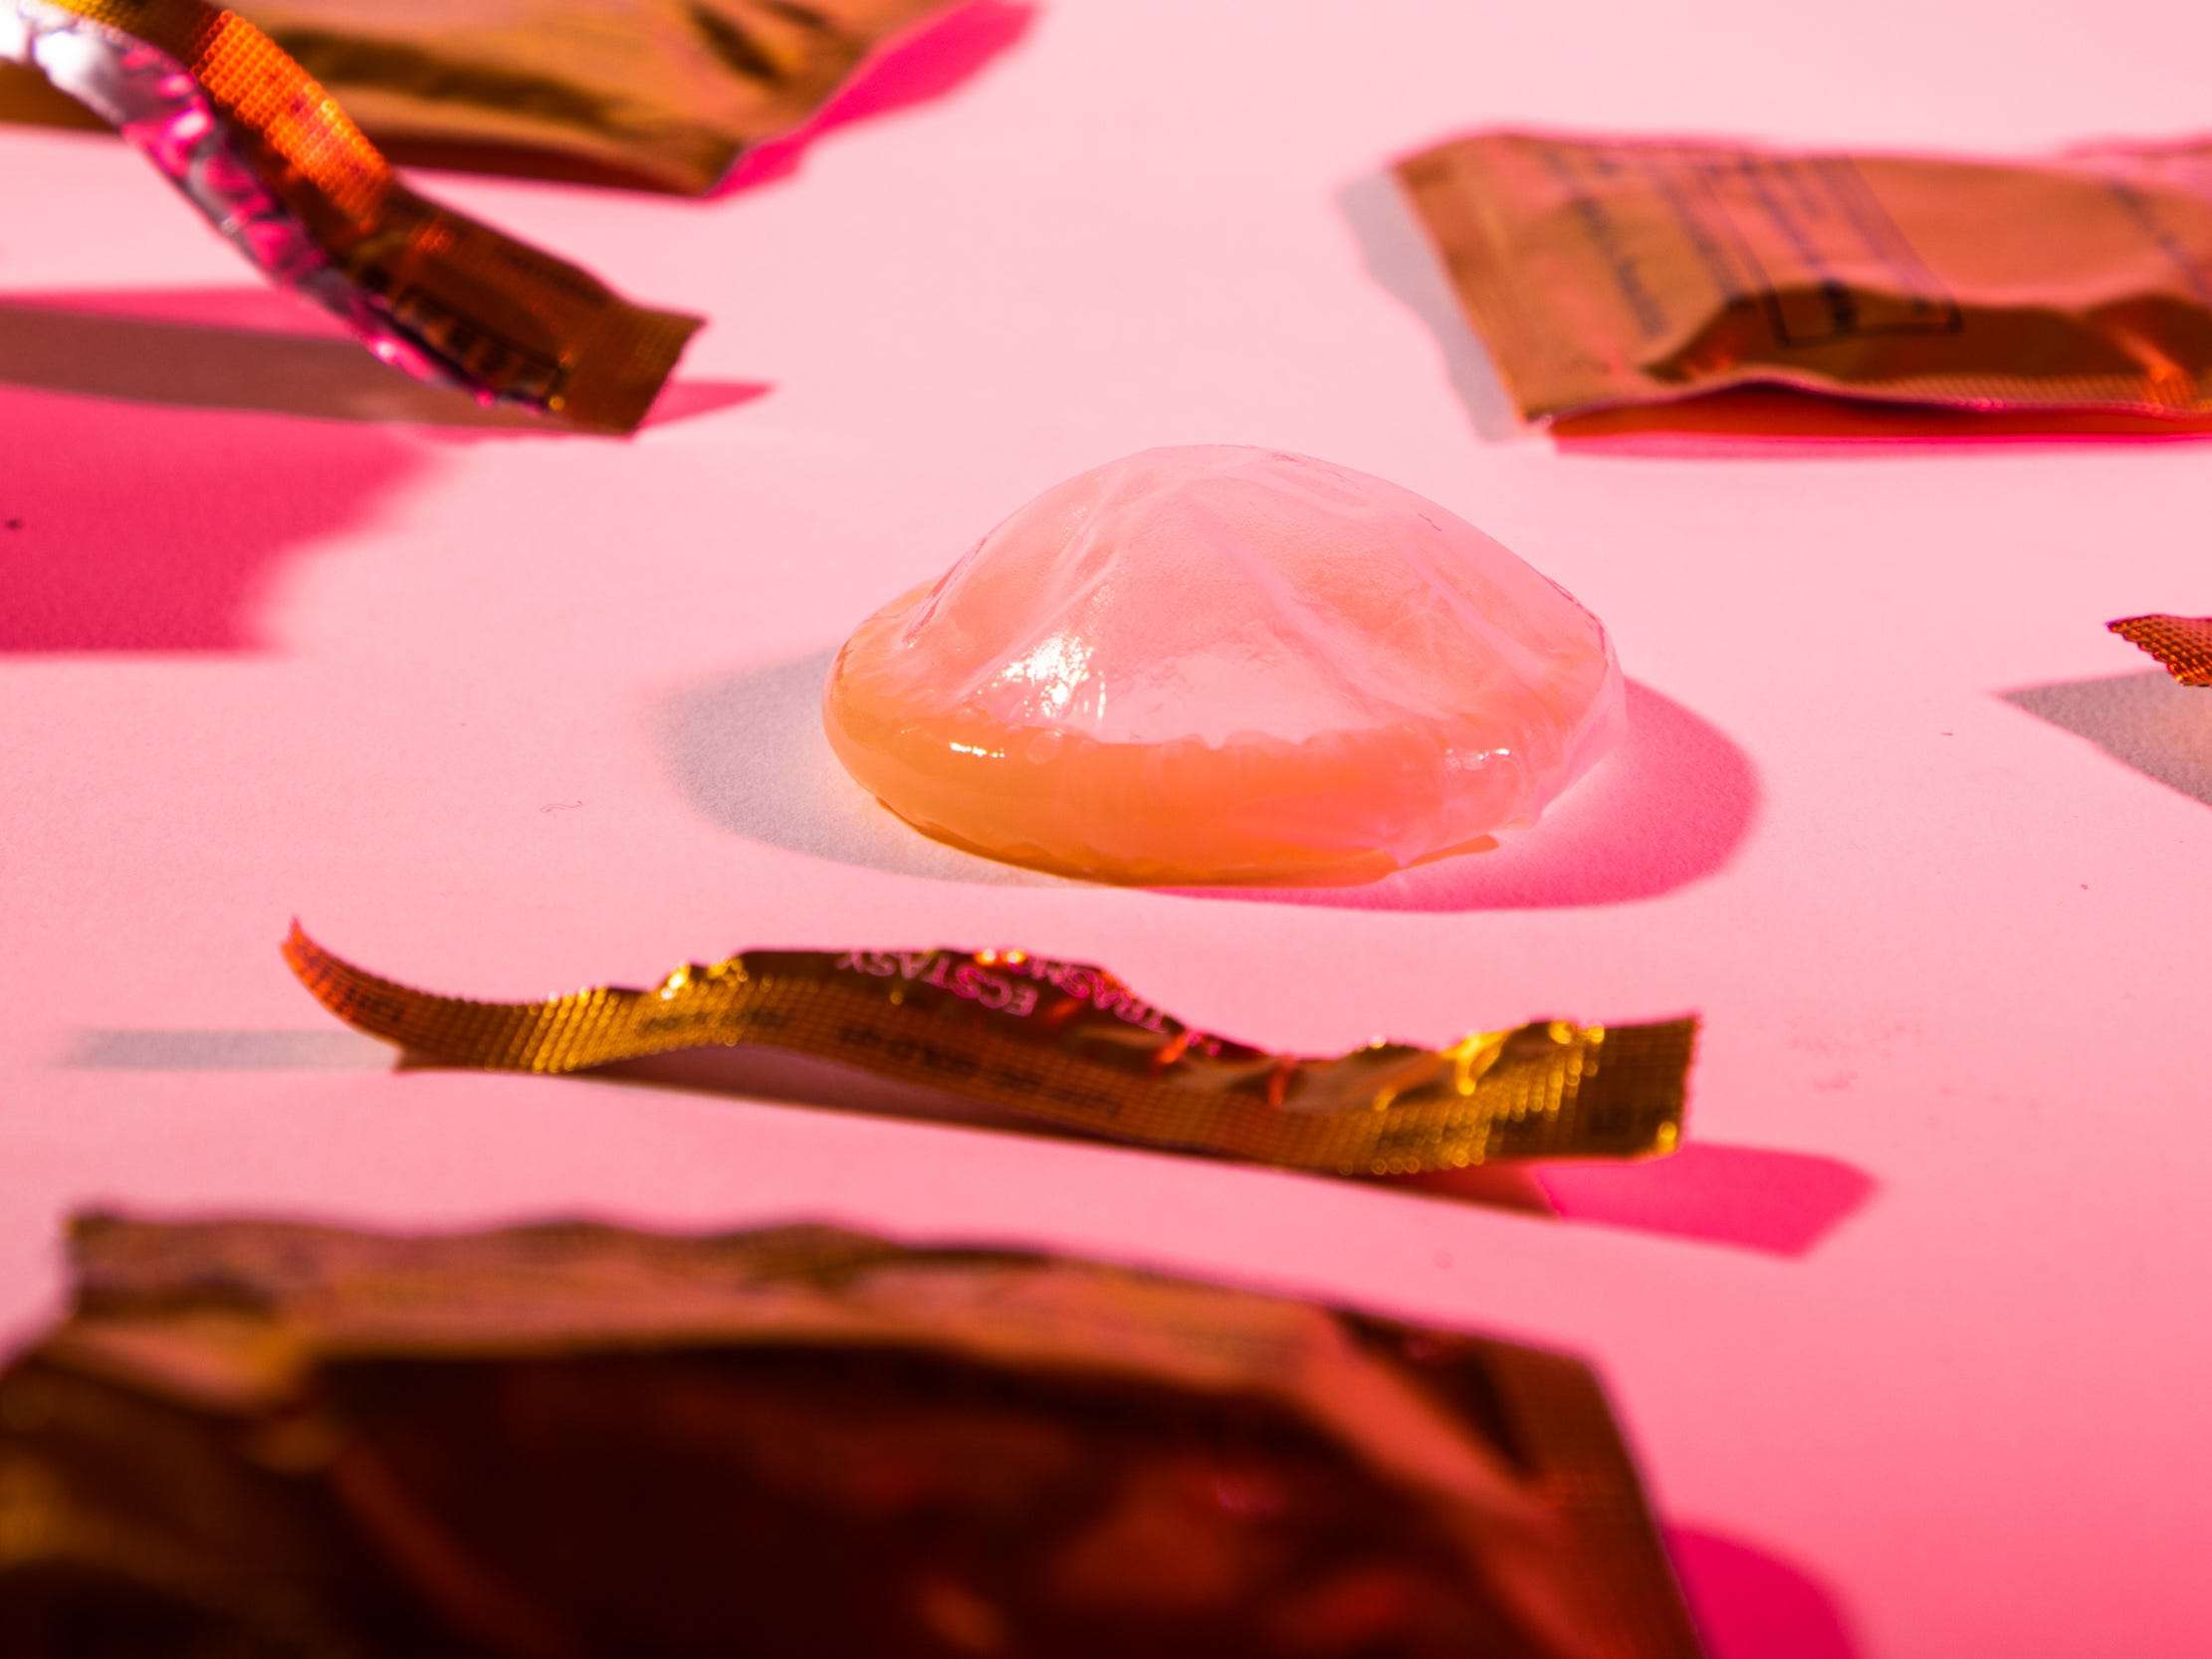 California Has Made It Illegal To Remove A Condom Without Consent